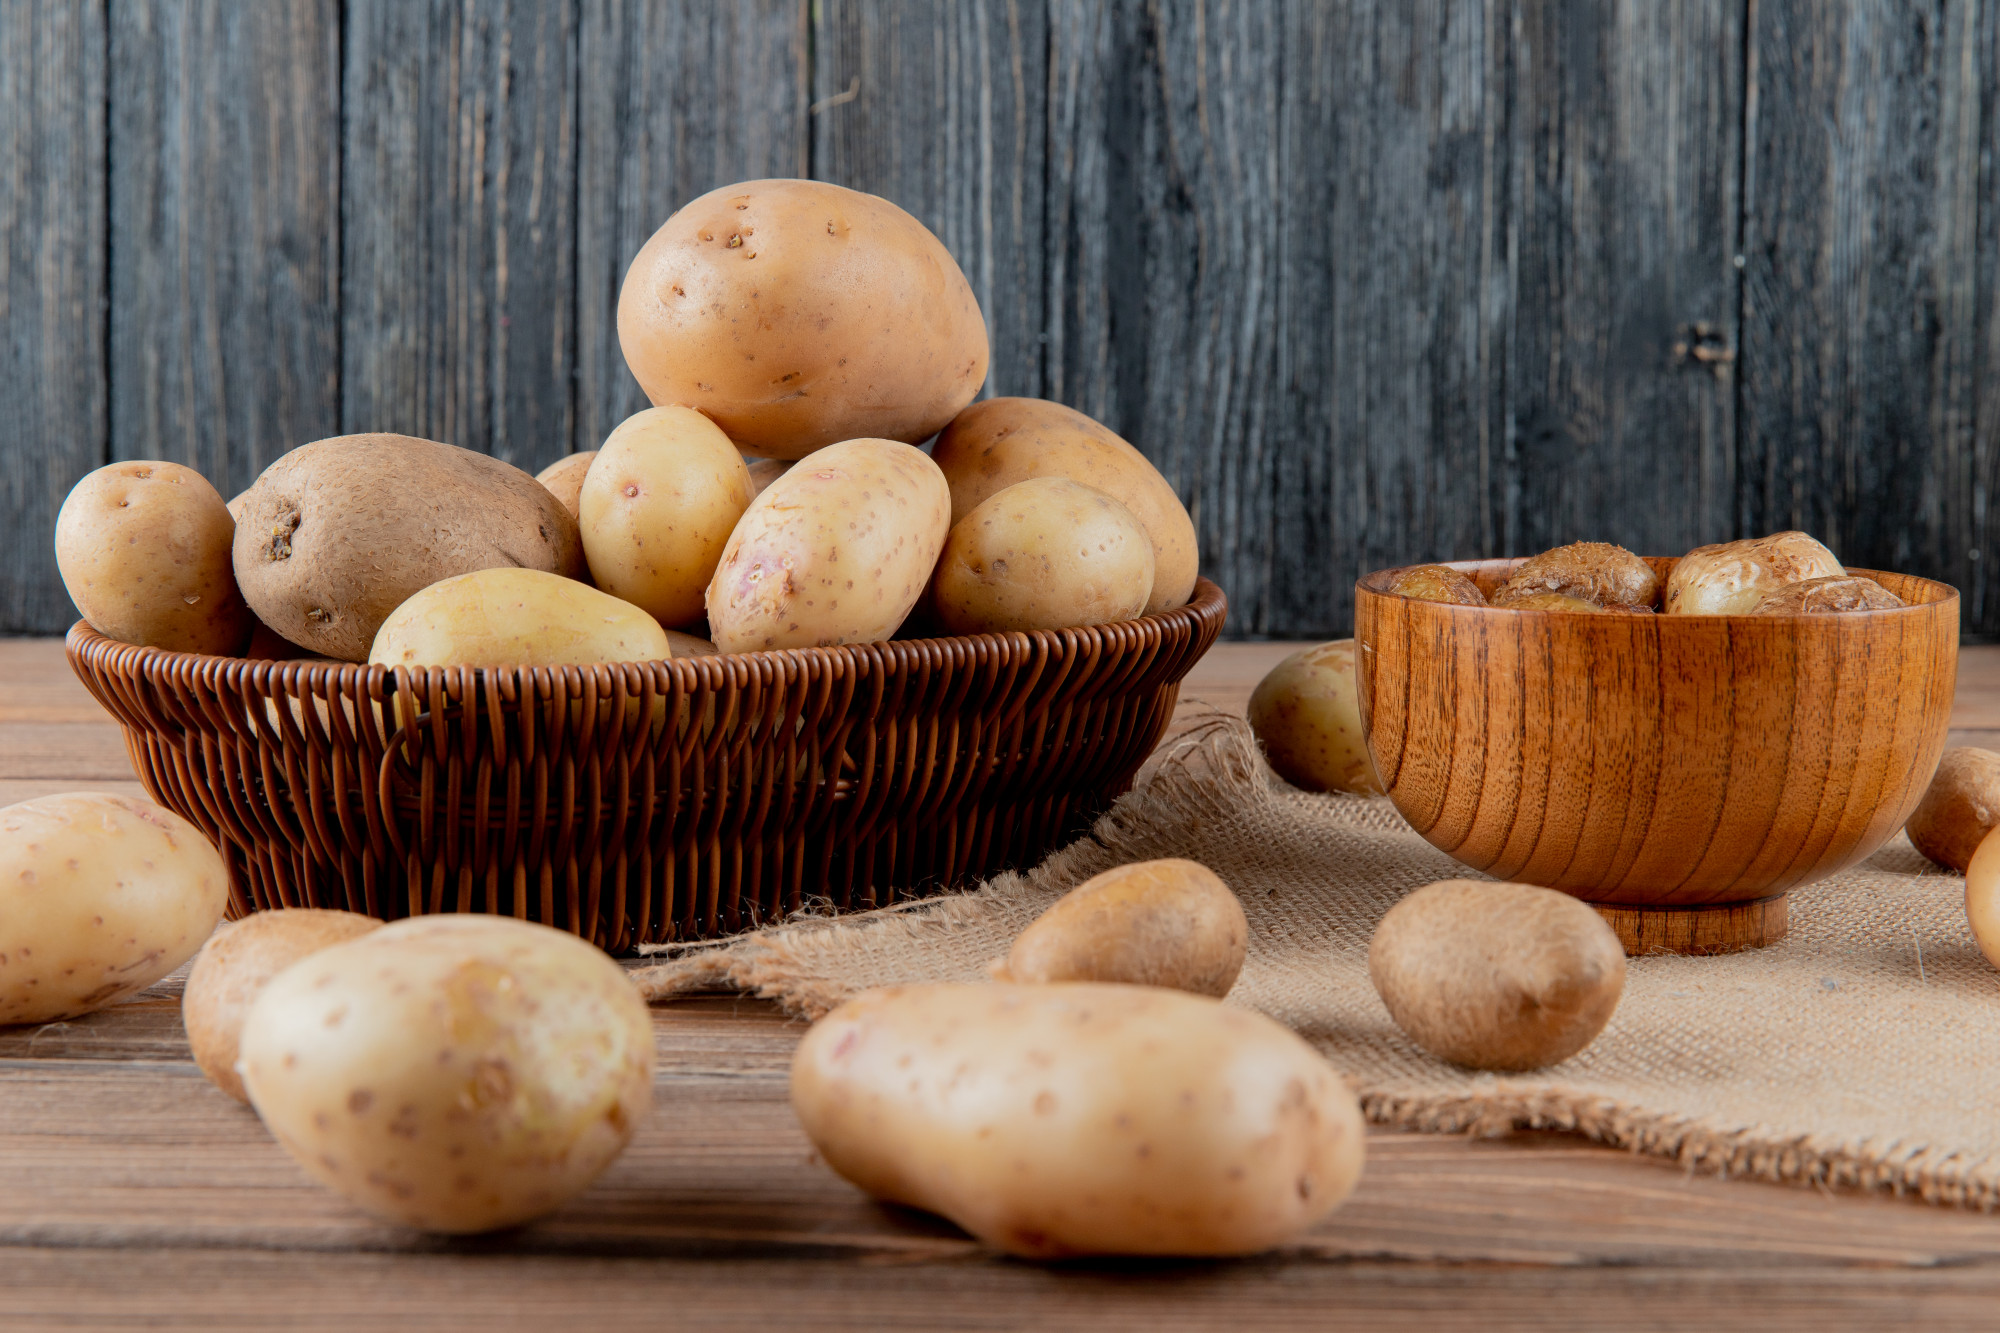 A Guide To The Cultivation And Harvesting Of Potatoes